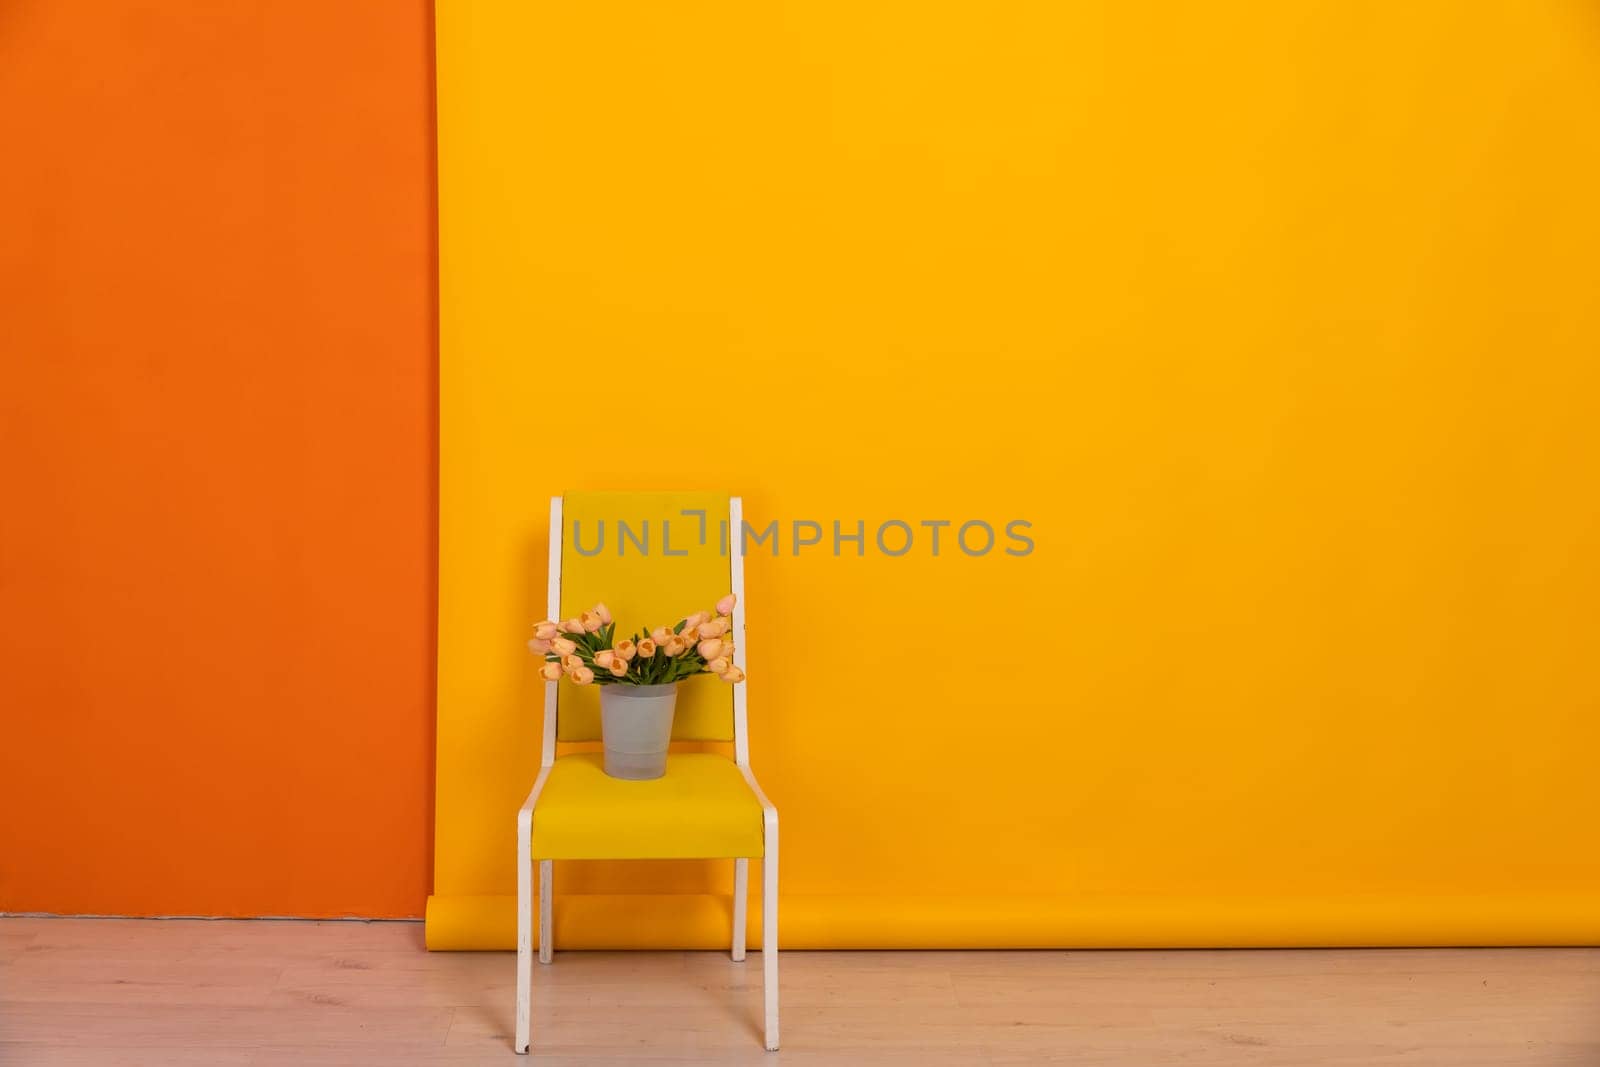 One yellow chair in orange wall interior by Simakov